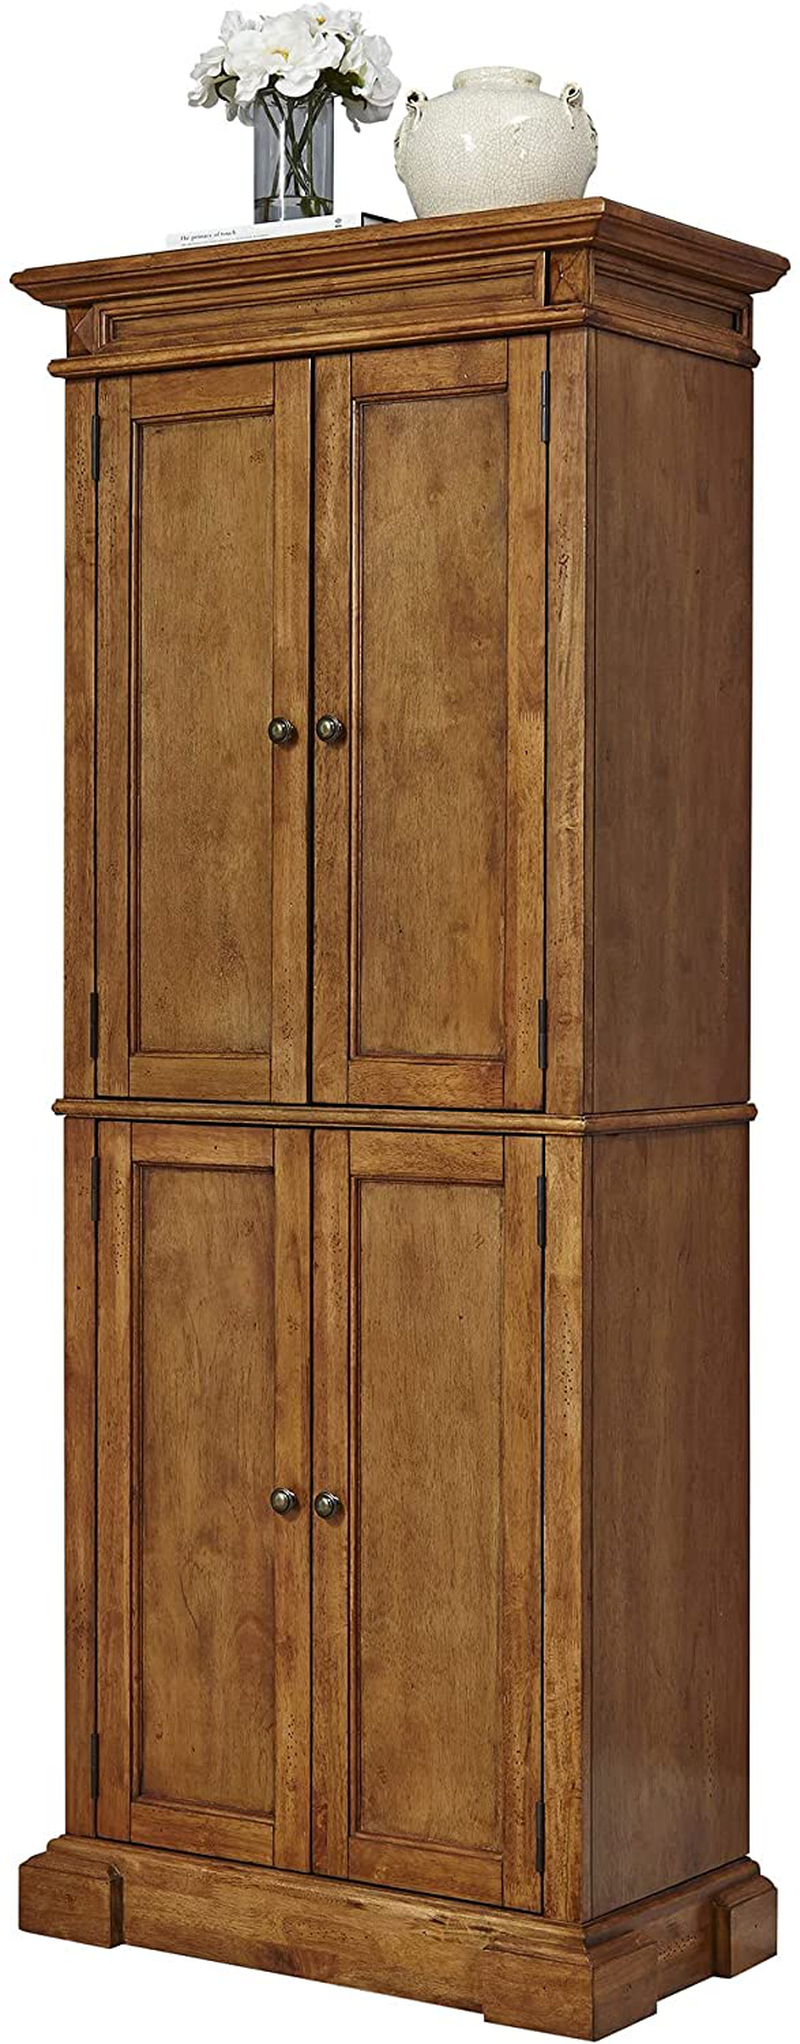 Home Styles Freestanding Americana Kitchen Pantry in Cherry Finish Constructed of Hardwood Solids with Four Storage Doors, Four Adjustable Shelves